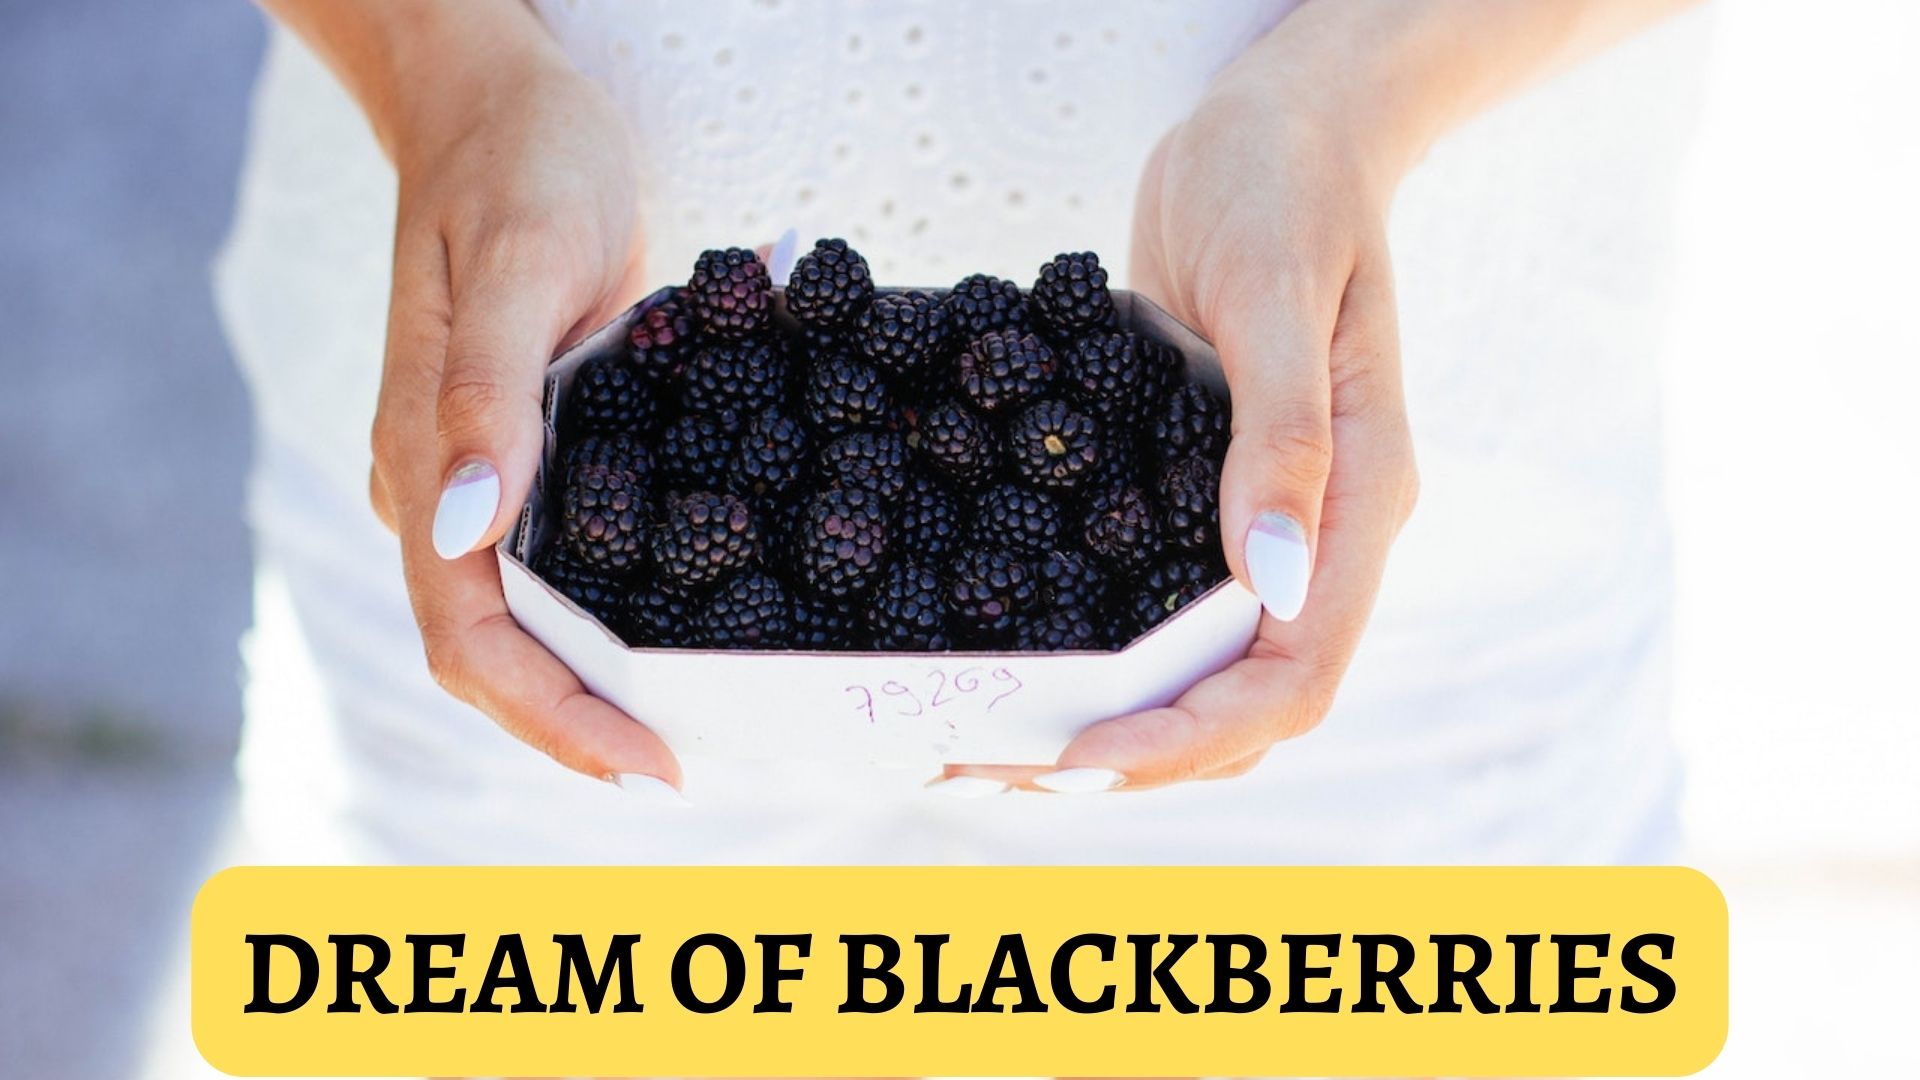 Dream Of Blackberries - A Symbolism Of Creativity And Novelty